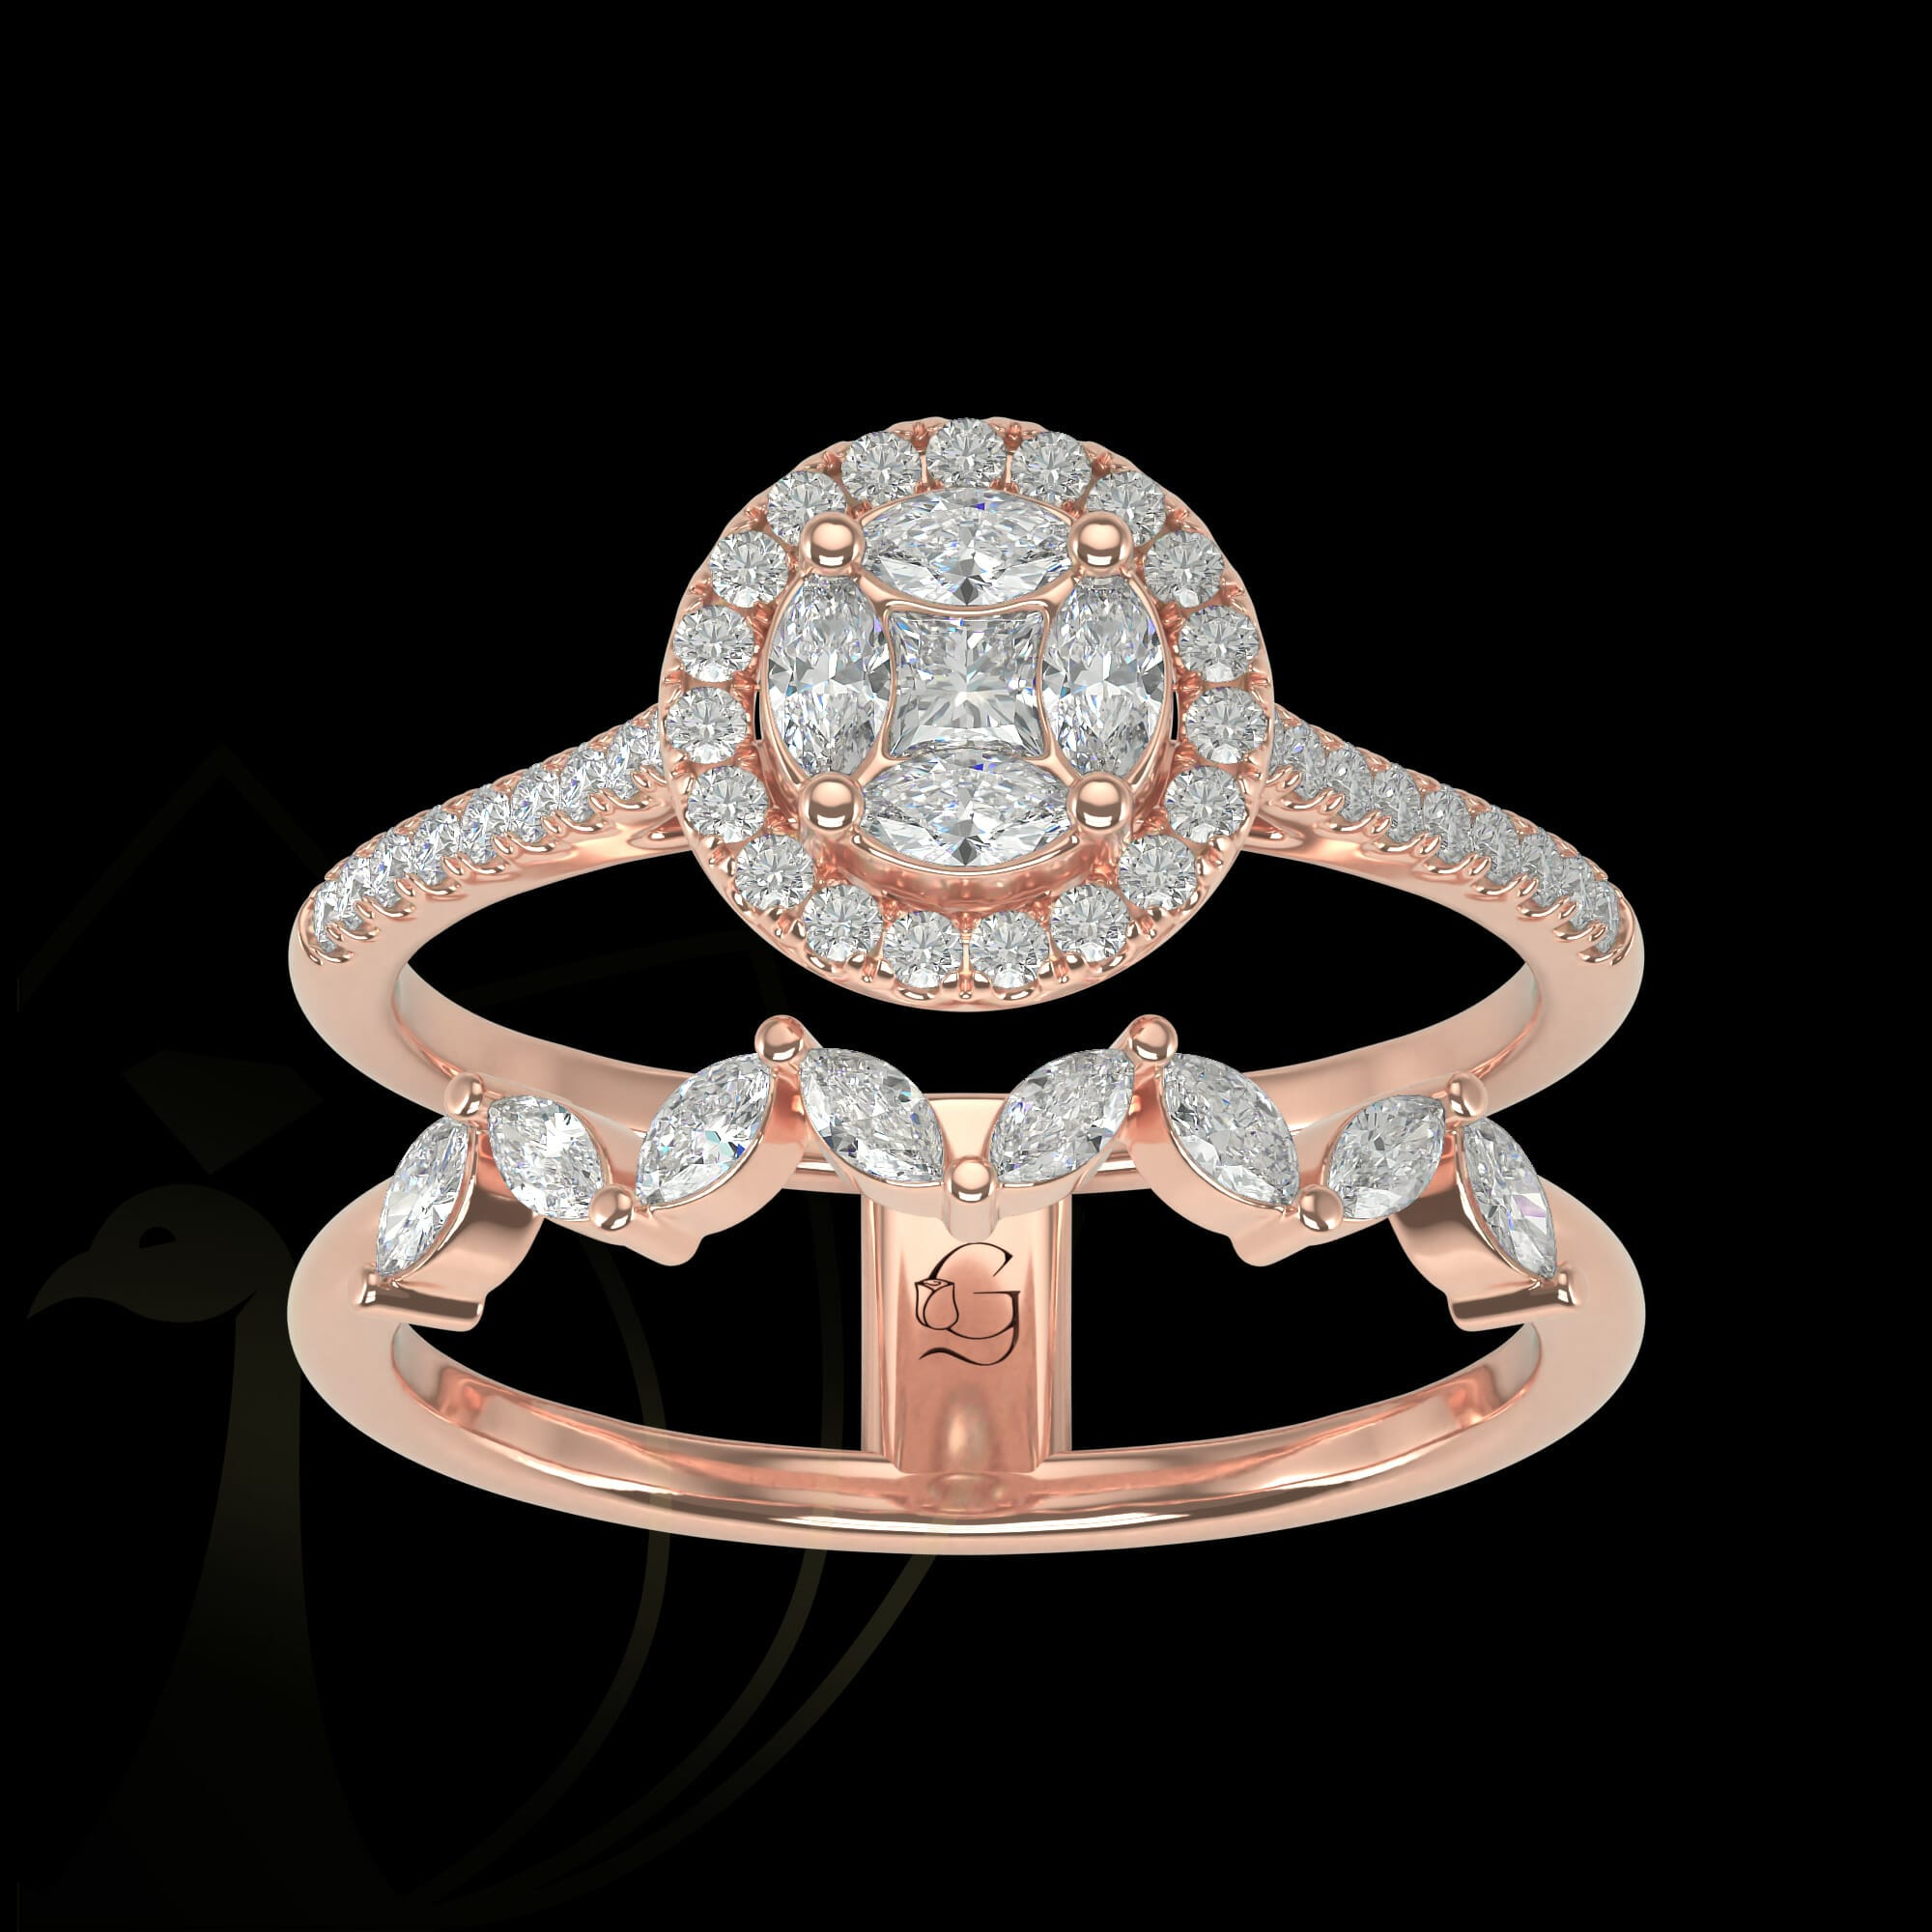 Twinning Beauty Diamond Ring from our exclusive Gulz Collection